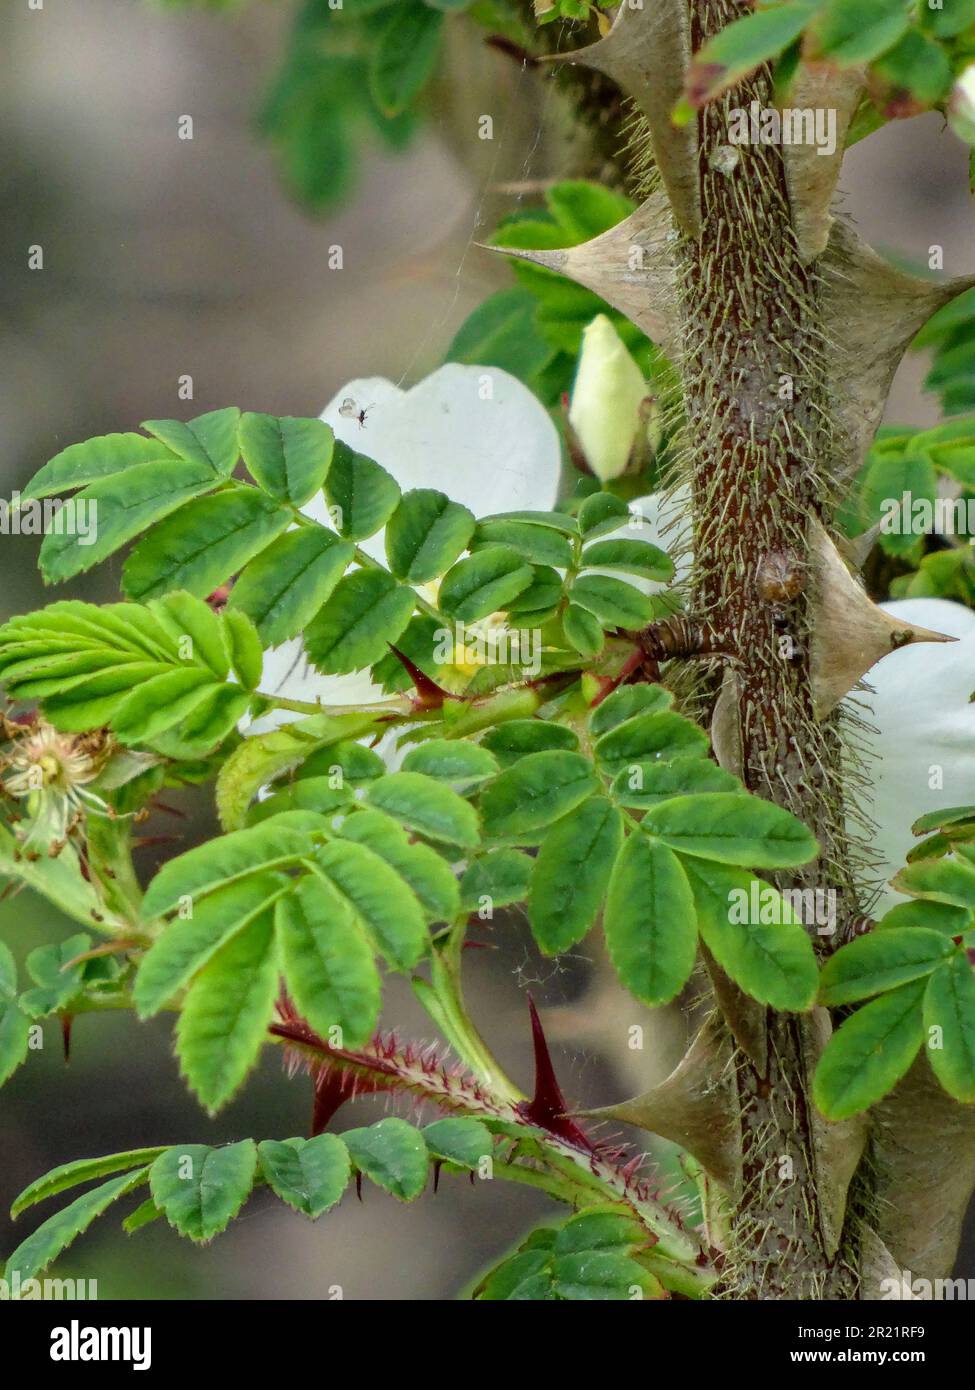 Natural close up plant portrait of white shrub rose Rosa Sericea sub. Omeiiensis f. Pteracantha. Natural close up flowering plant portrait Stock Photo